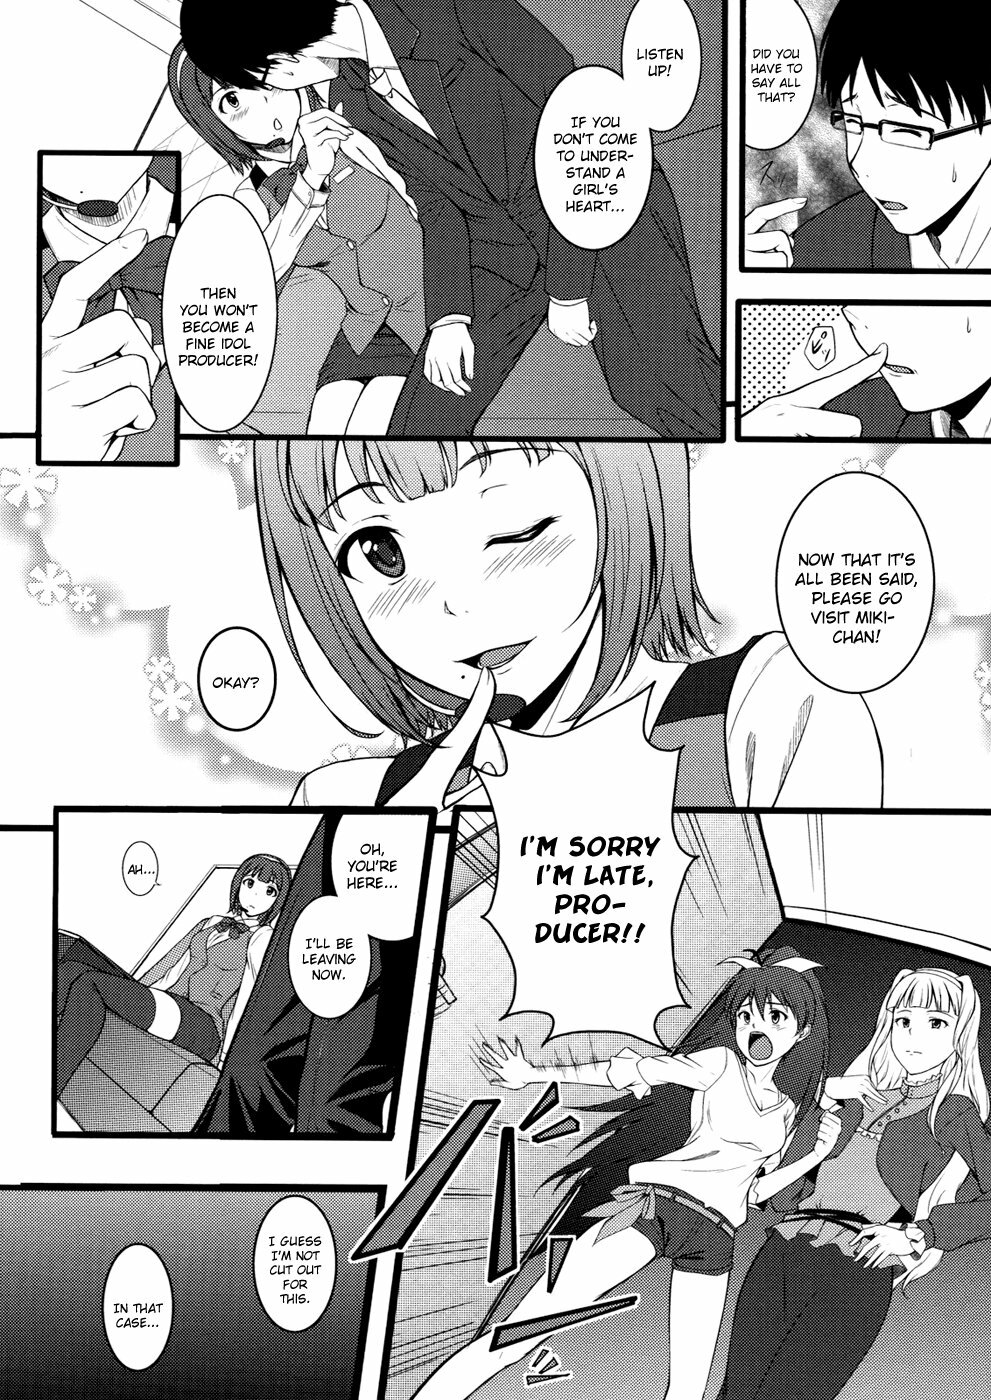 (C79) [Count2.4 (Nishi)] Continuation (THE iDOLM@STER) [English] [redCoMet] page 8 full